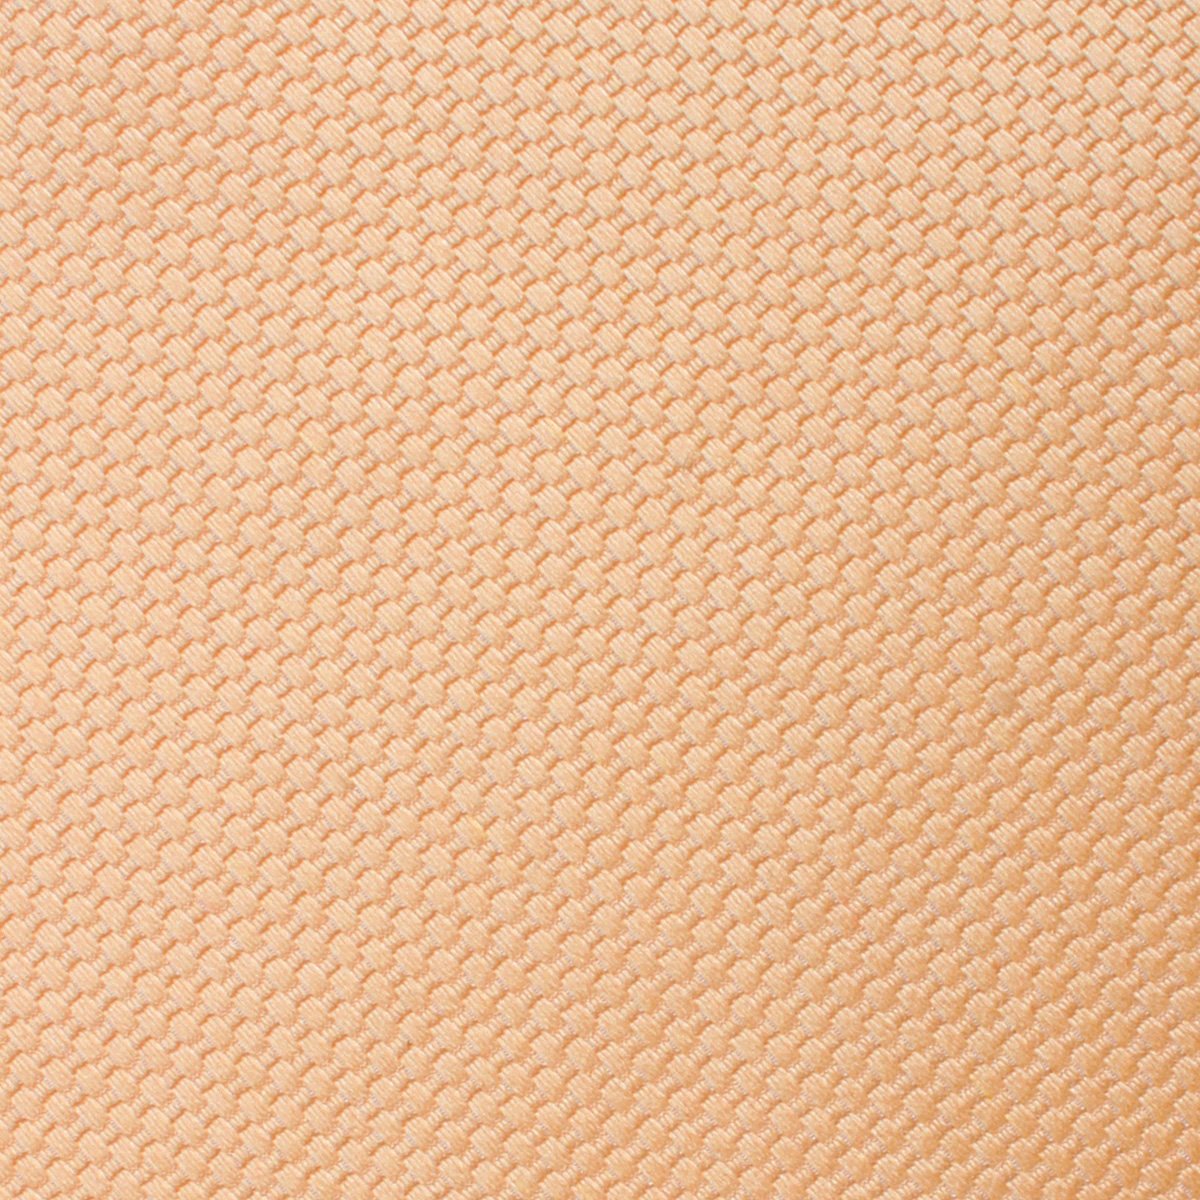 Champagne Gold Basket Weave Skinny Tie Fabric